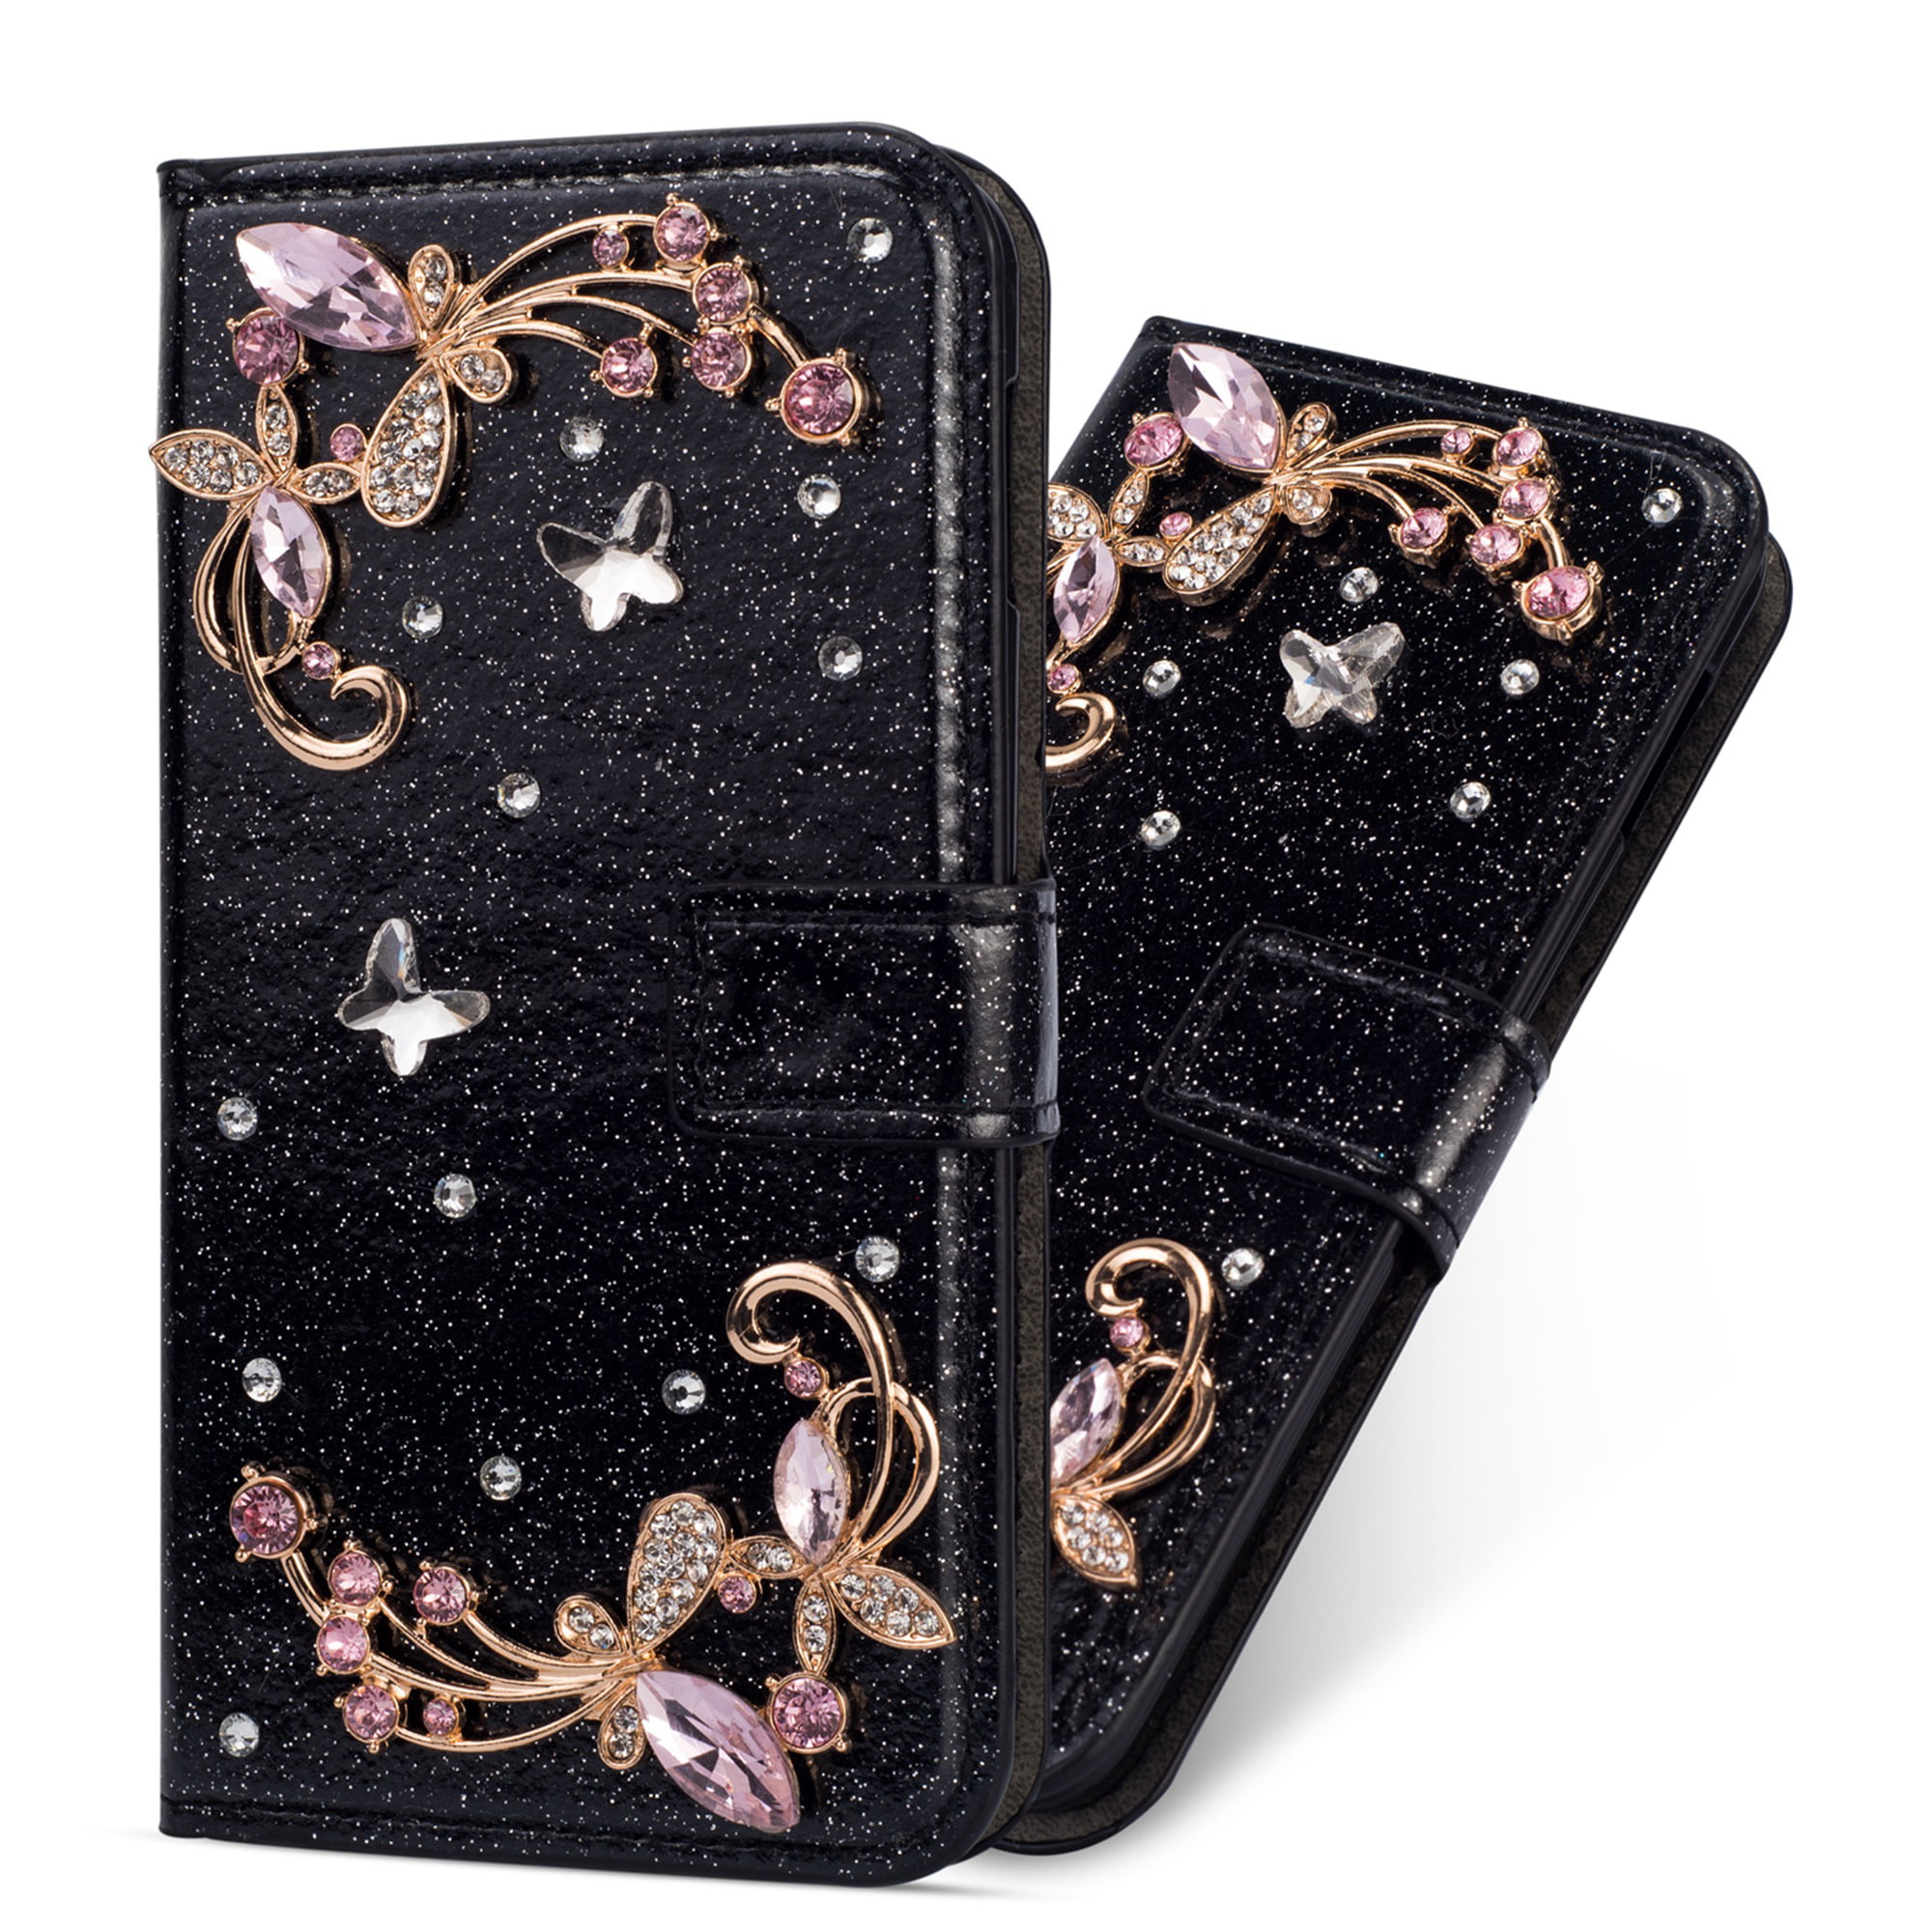 Herbests Compatible with iPhone XS/iPhone X Wallet Case Glitter Bling Diamond Rhinestone Leather Flip Cover Embossed Mandala Flower Owl Design Protective Case Credit Card Holder,Pink 